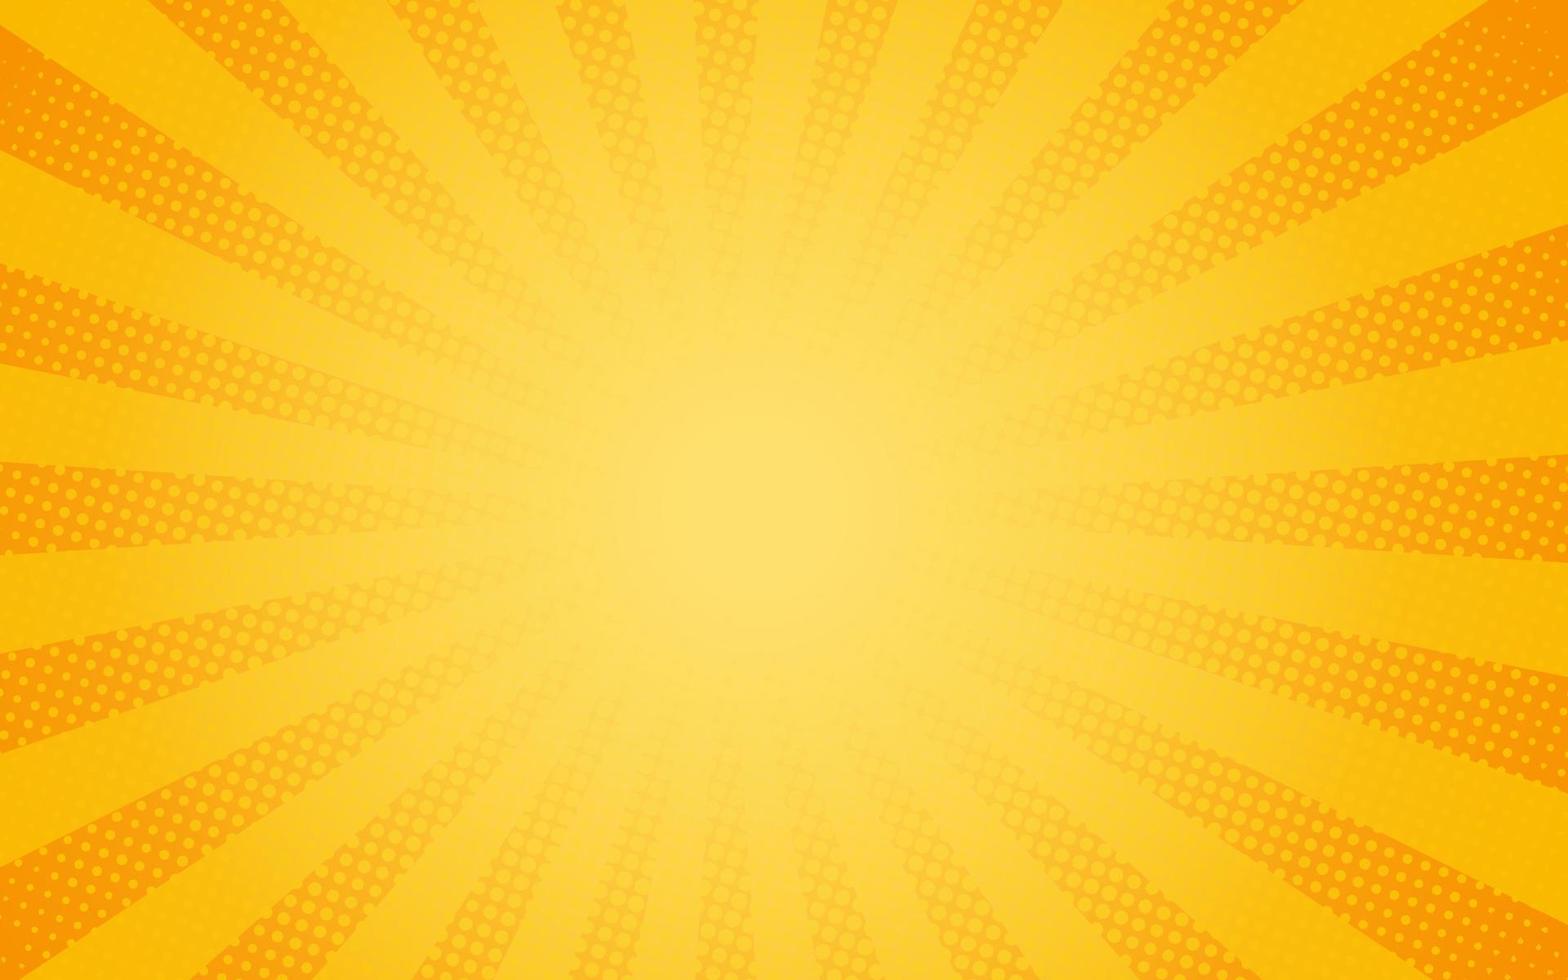 Sun rays Retro vintage style on yellow and orange background, Comic pattern with starburst and halftone. Cartoon retro sunburst effect with dots. Rays. Summer Banner Vector illustration